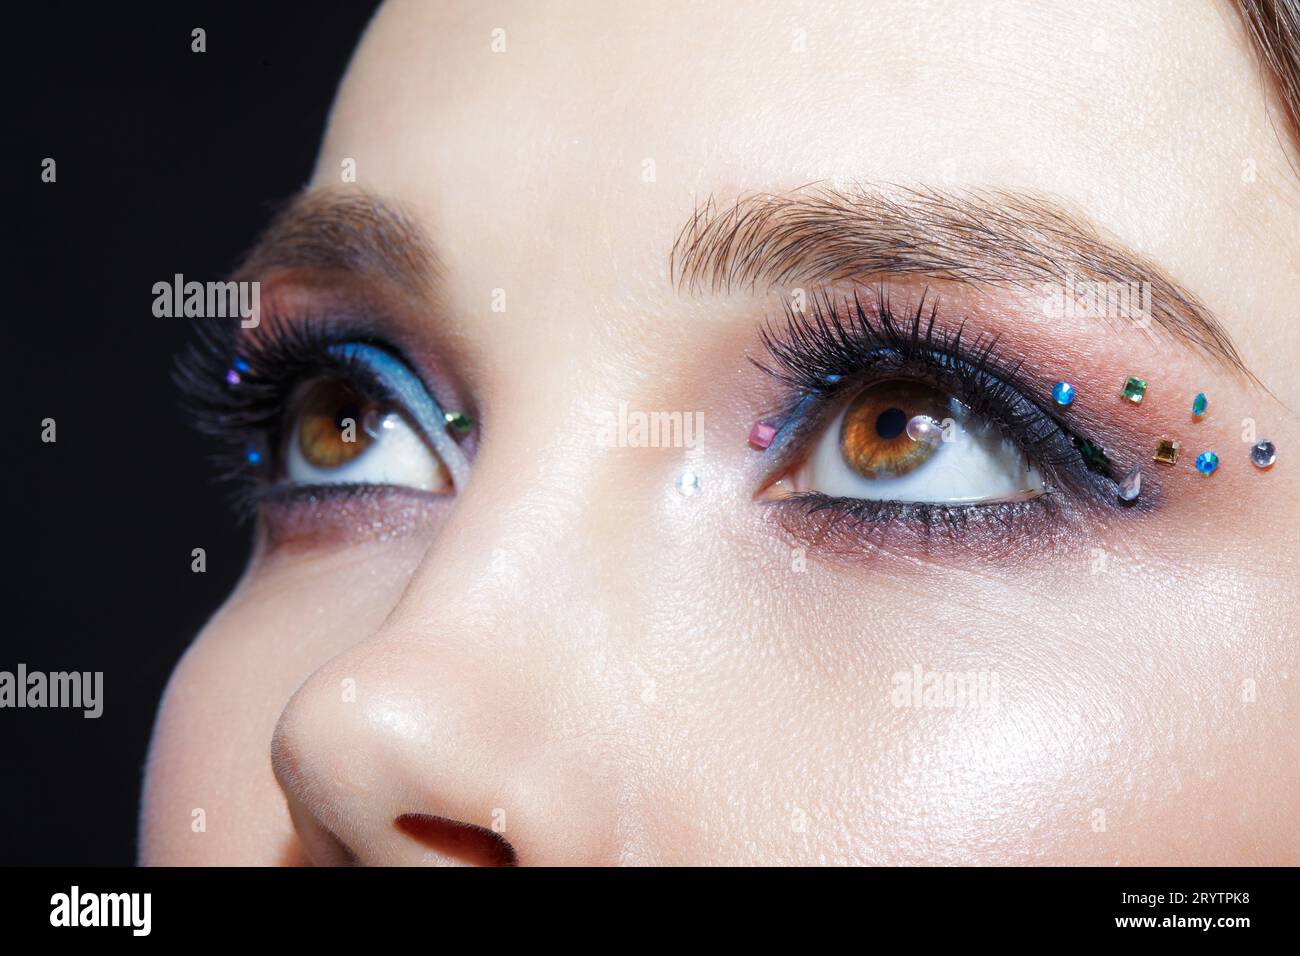 Closeup shot of human woman face. Female with face and eyes beauty makeup with blue eye shadow make up and rhinestones Stock Photo